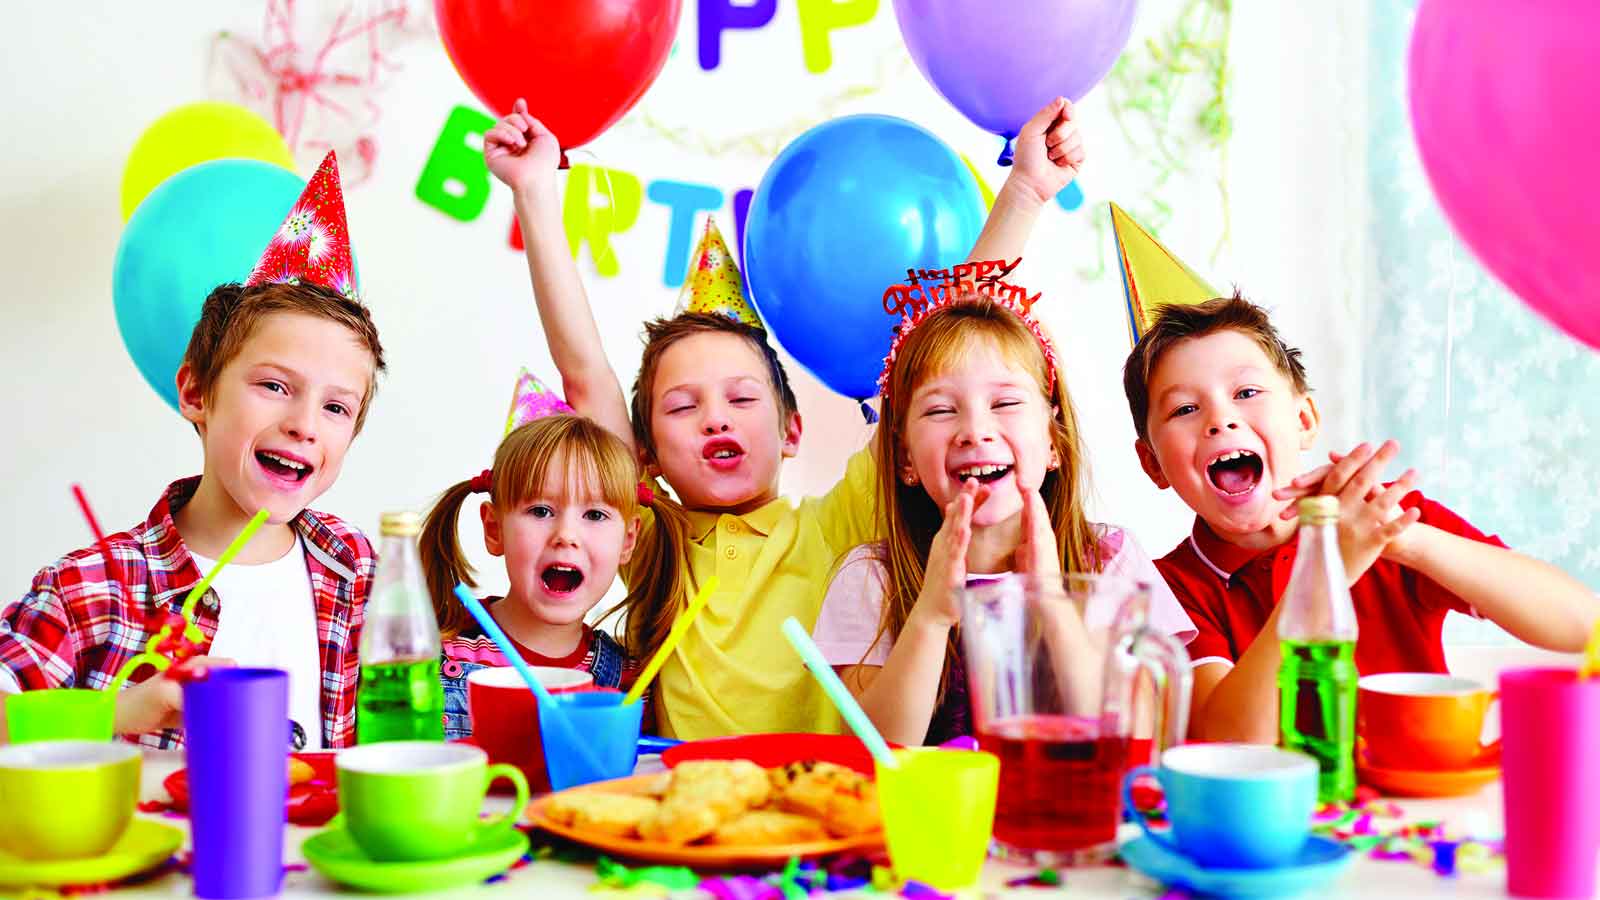 3 Simple Steps for Kids’ Birthday Party Etiquette